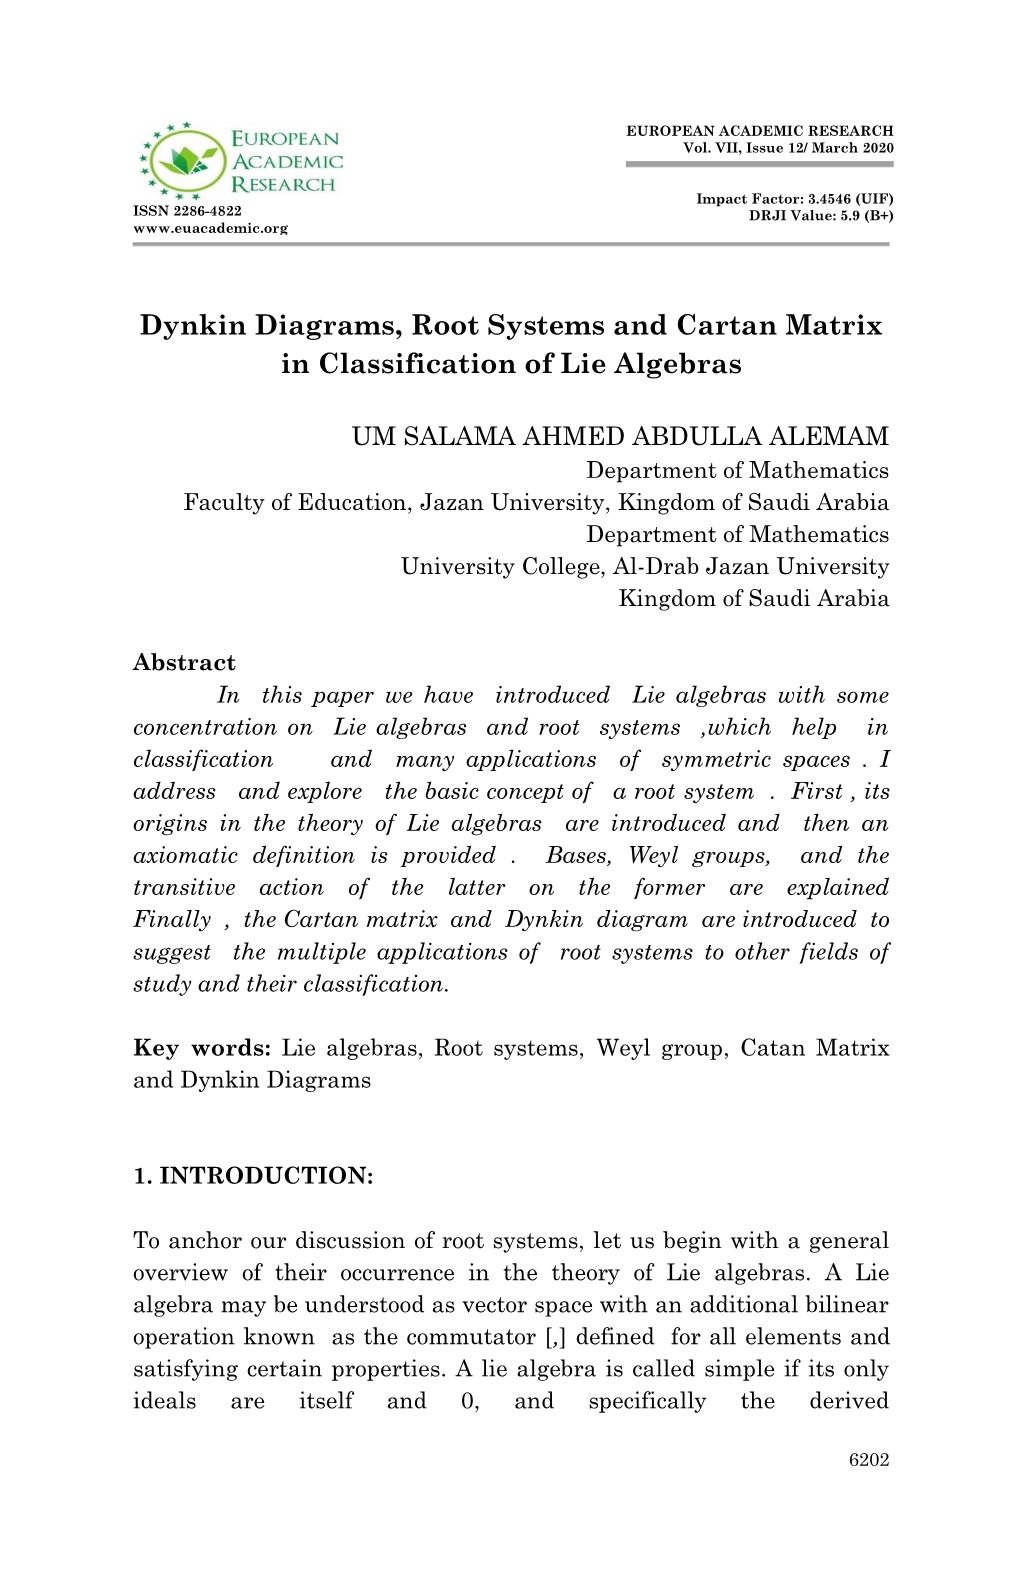 Dynkin Diagrams, Root Systems and Cartan Matrix in Classification of Lie Algebras